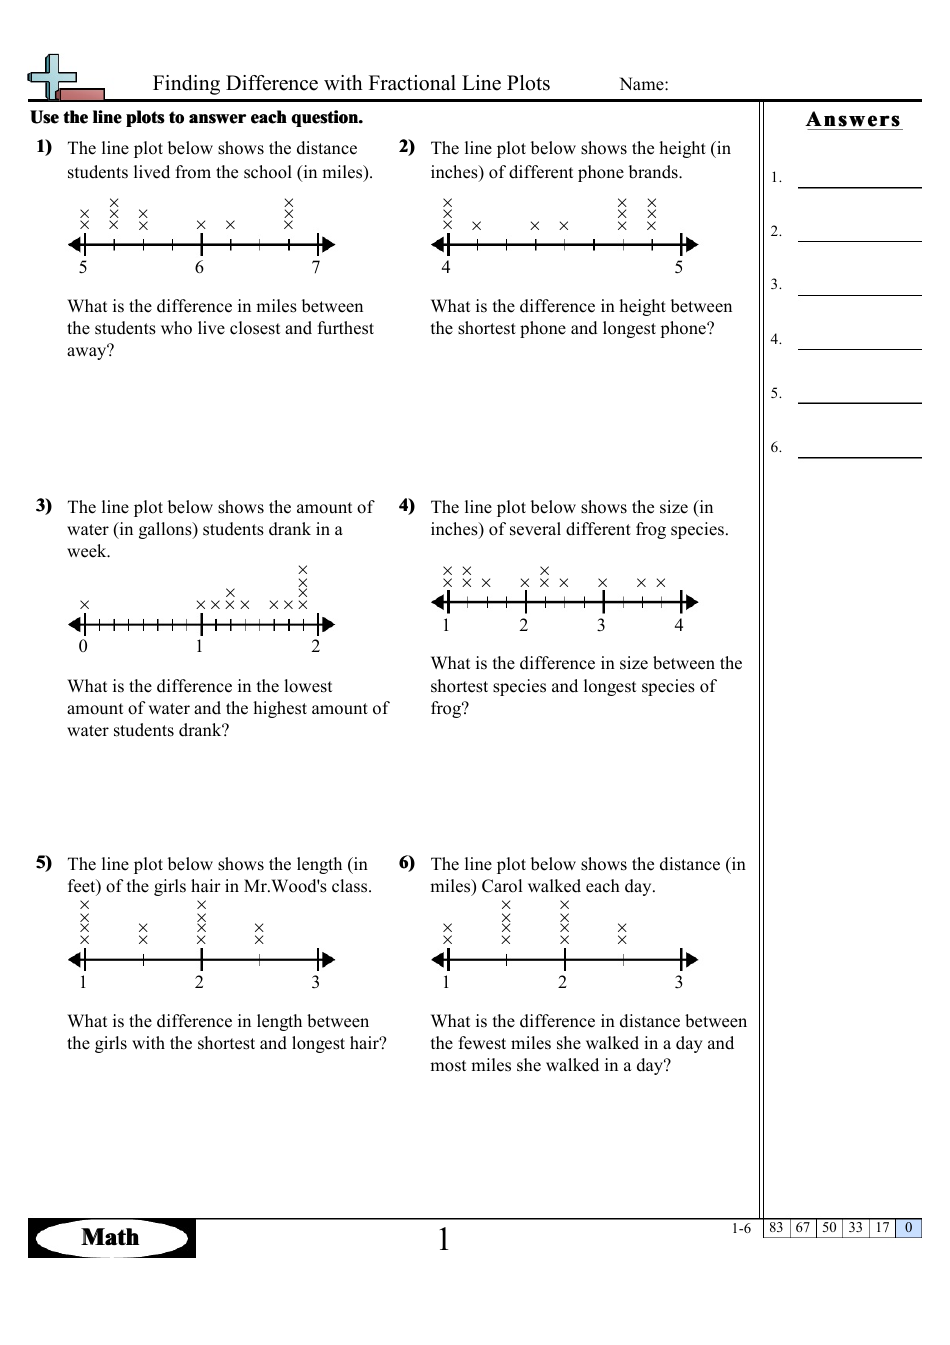 Difference with Fractional Line Plots Worksheets with Answers